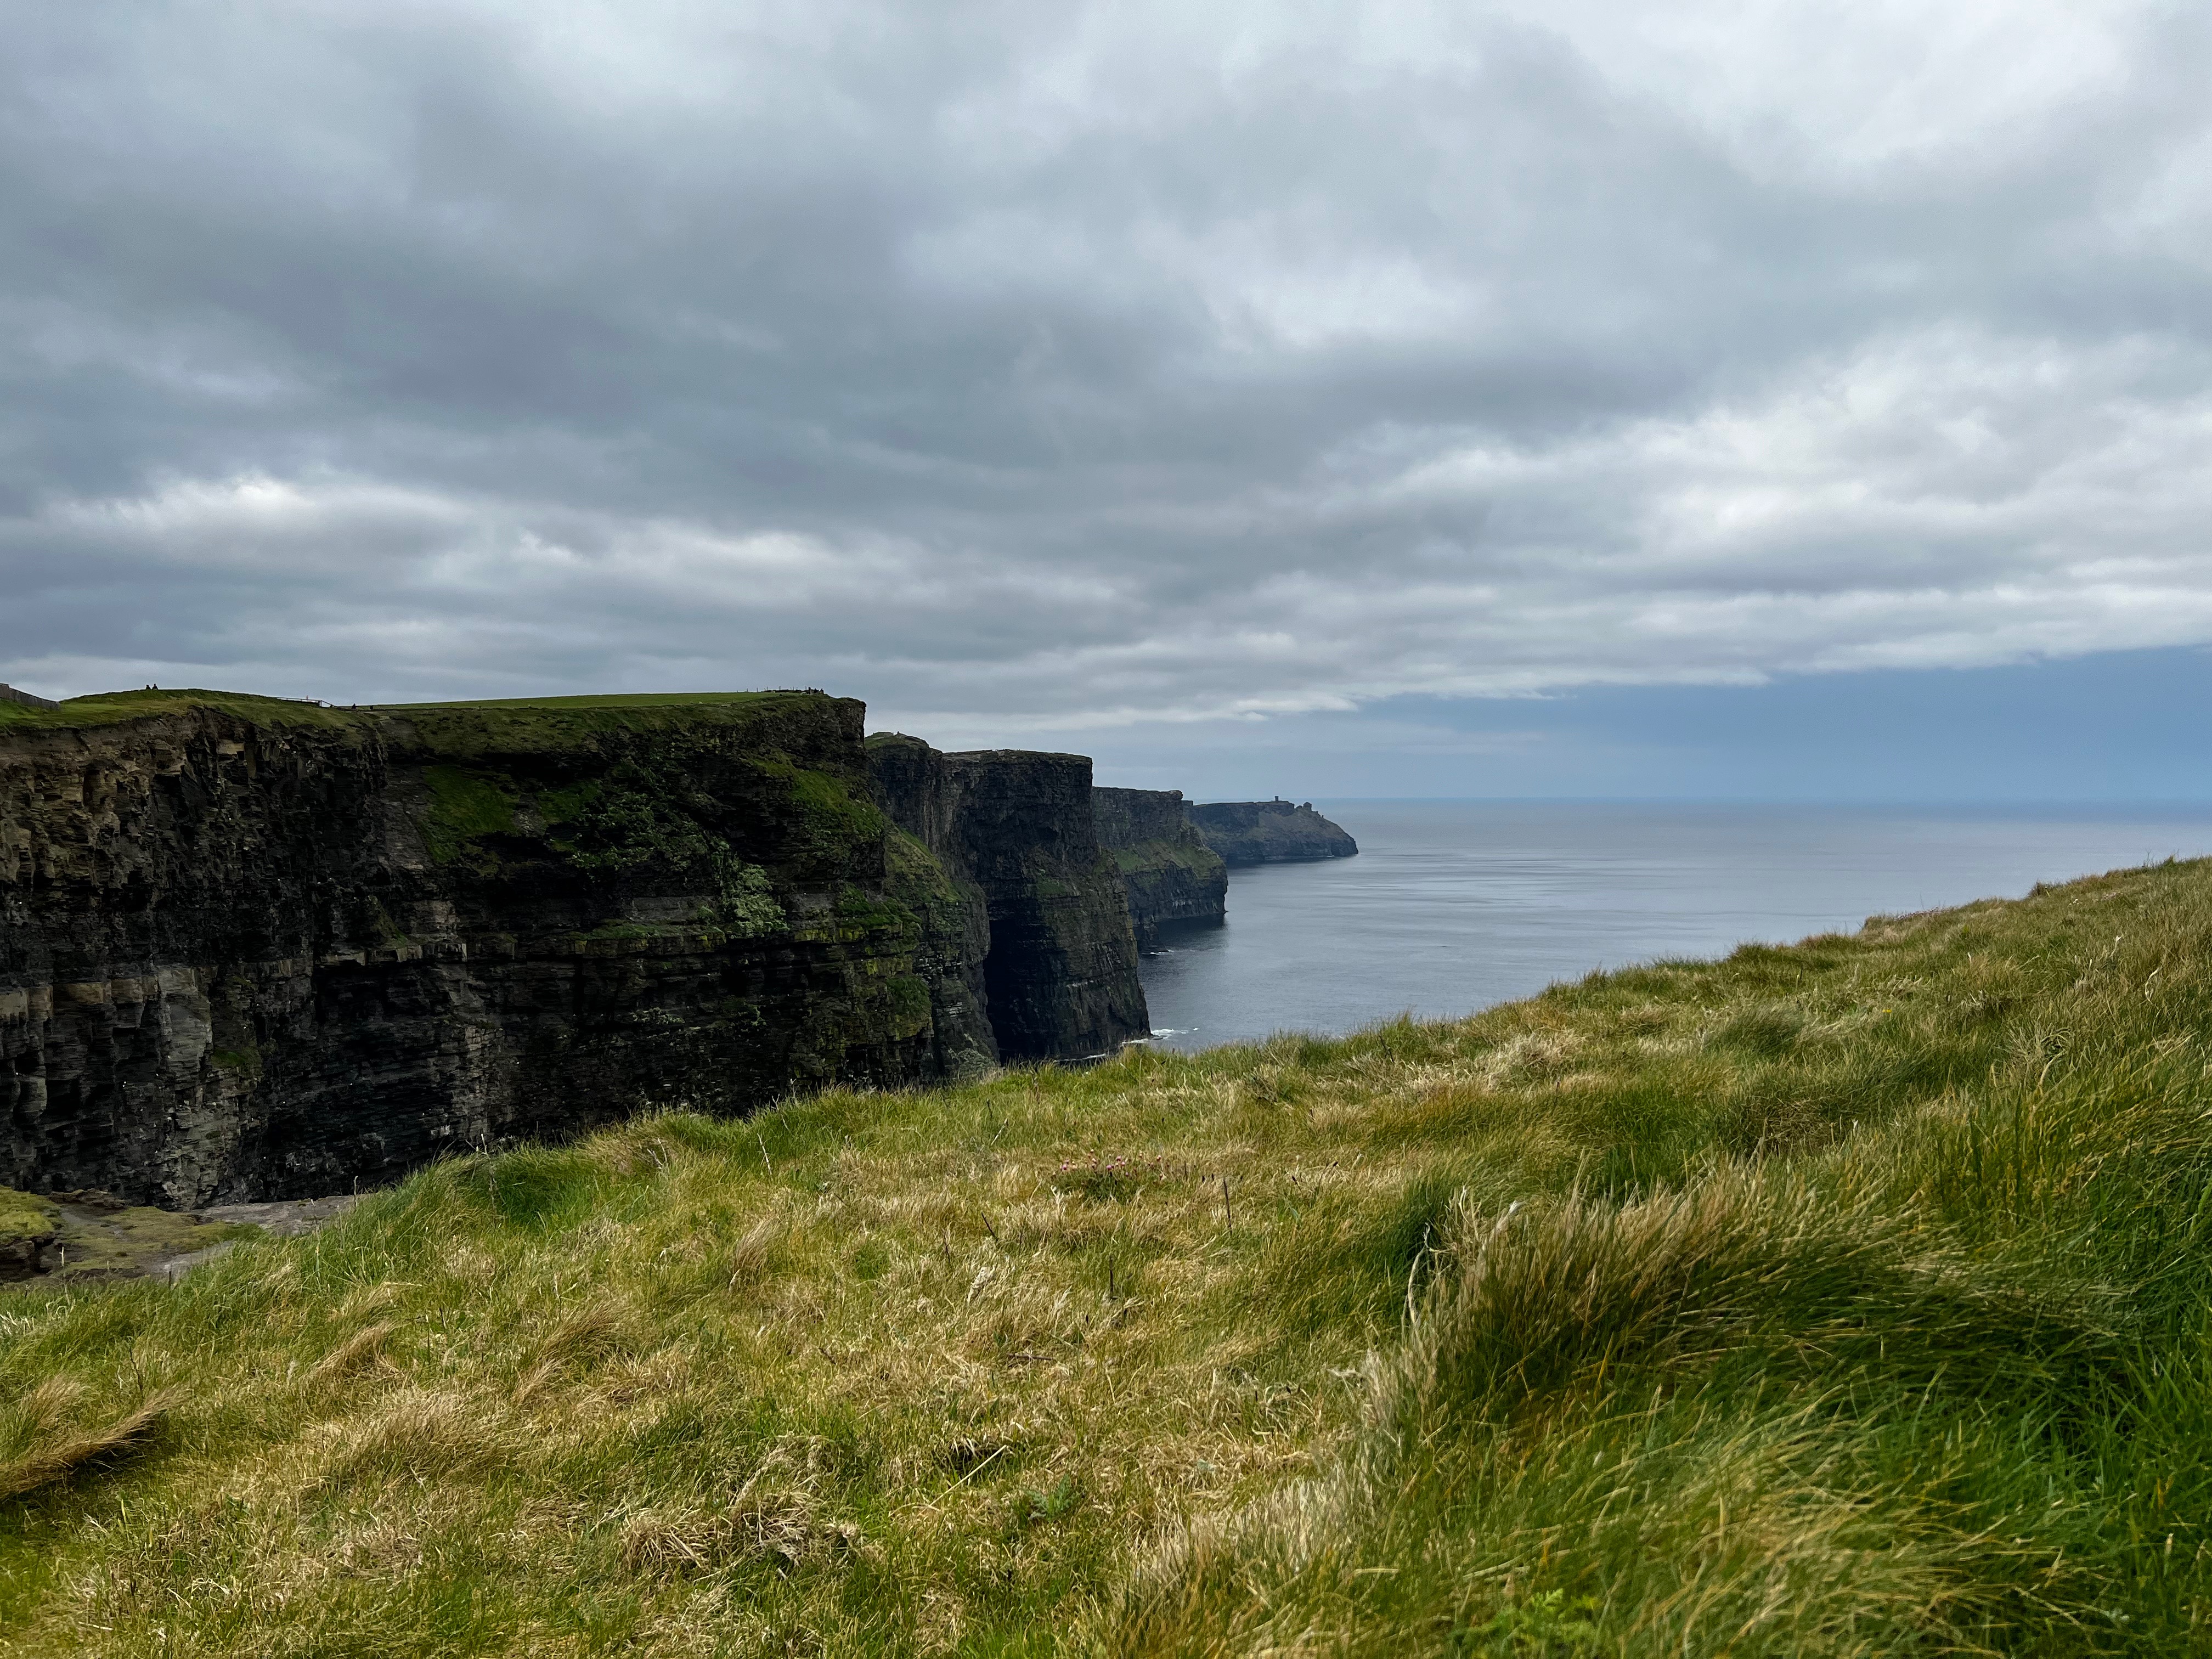 Community photo by Sudhir Sharma | Cliffs of Moher, Ireland